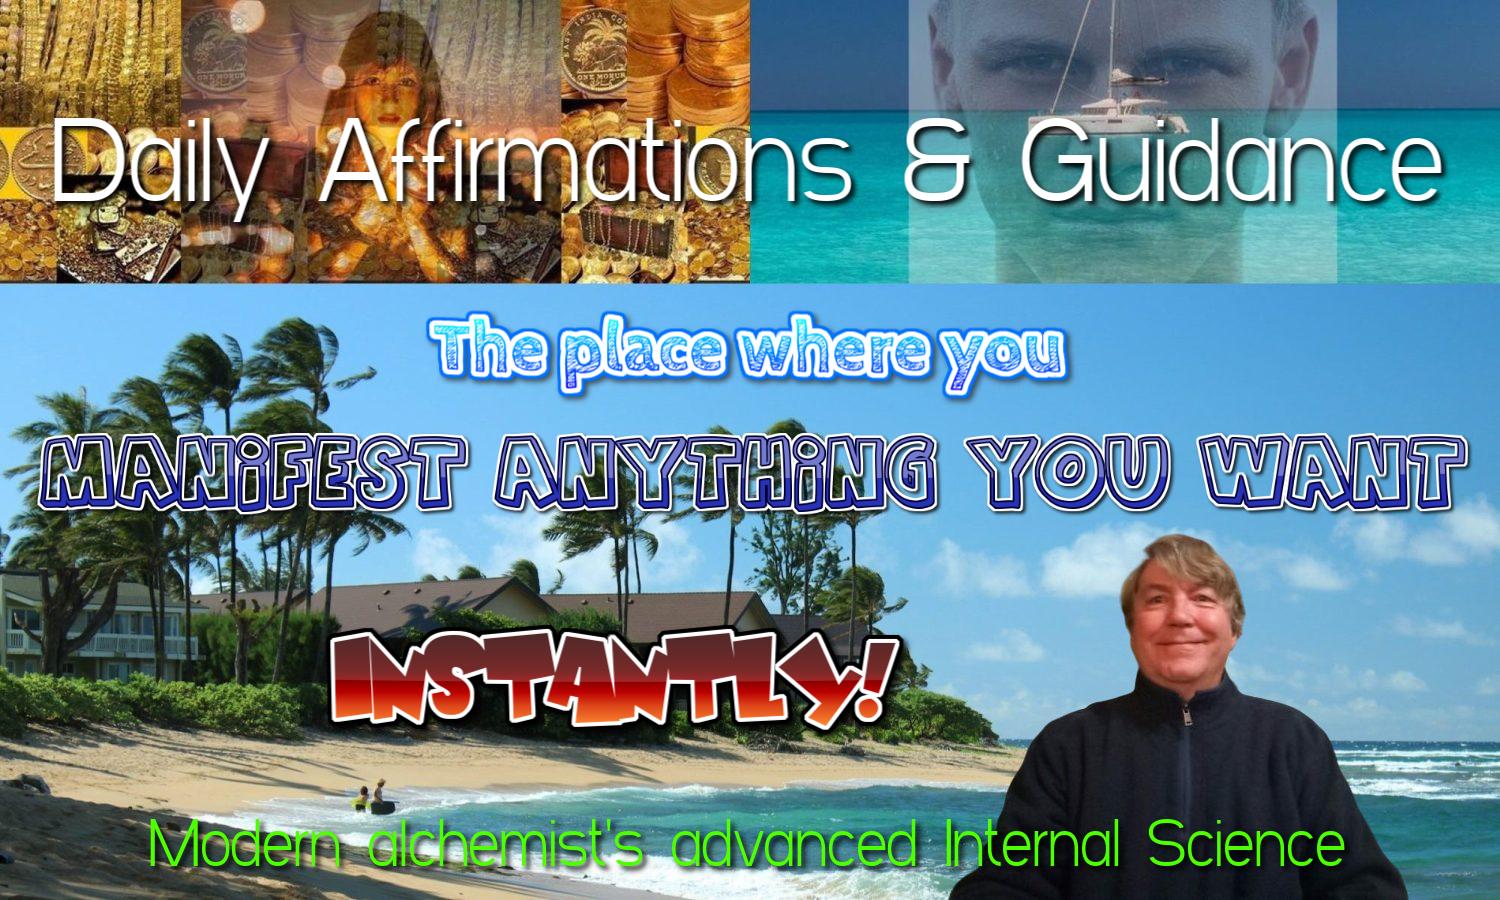 Your Daily Affirmations & Metaphysical Guidance by William Eastwood